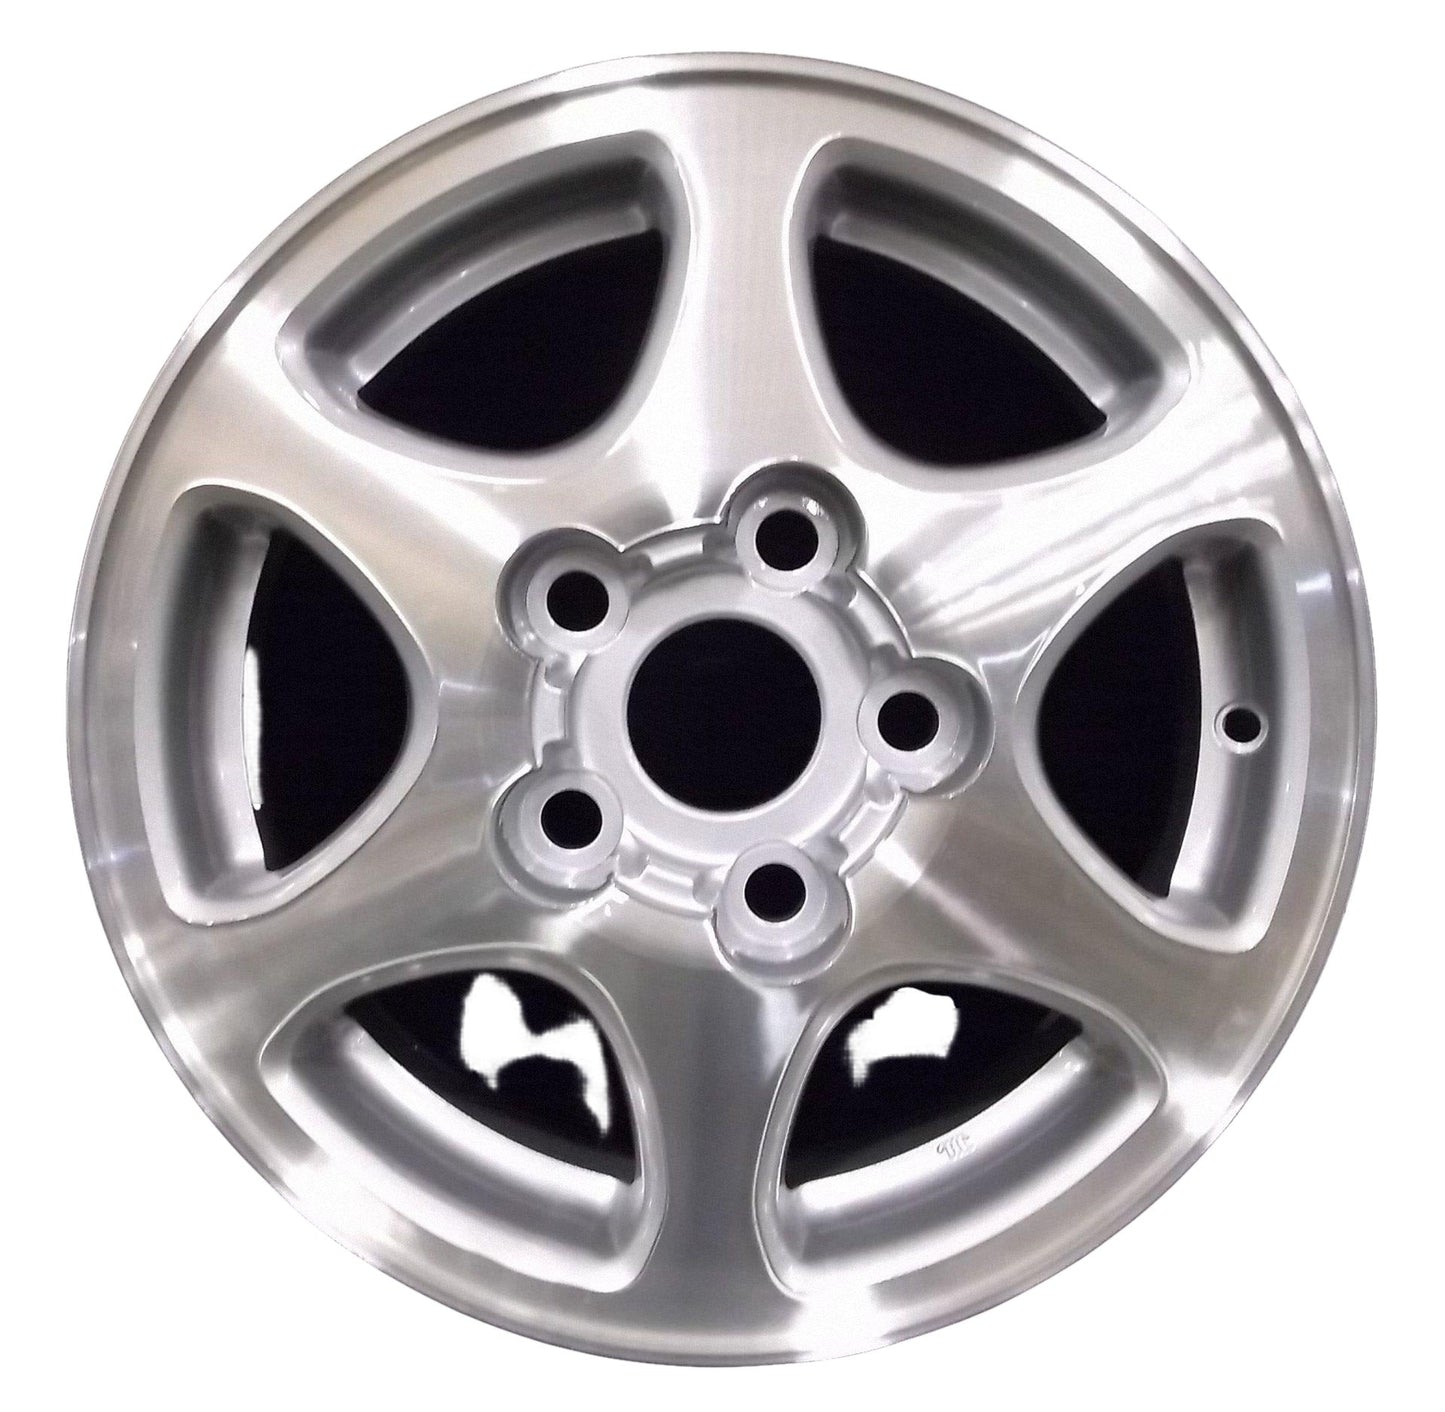 Toyota Camry  1997, 1998, 1999 Factory OEM Car Wheel Size 14x5.5 Alloy WAO.69347.PS07.MA